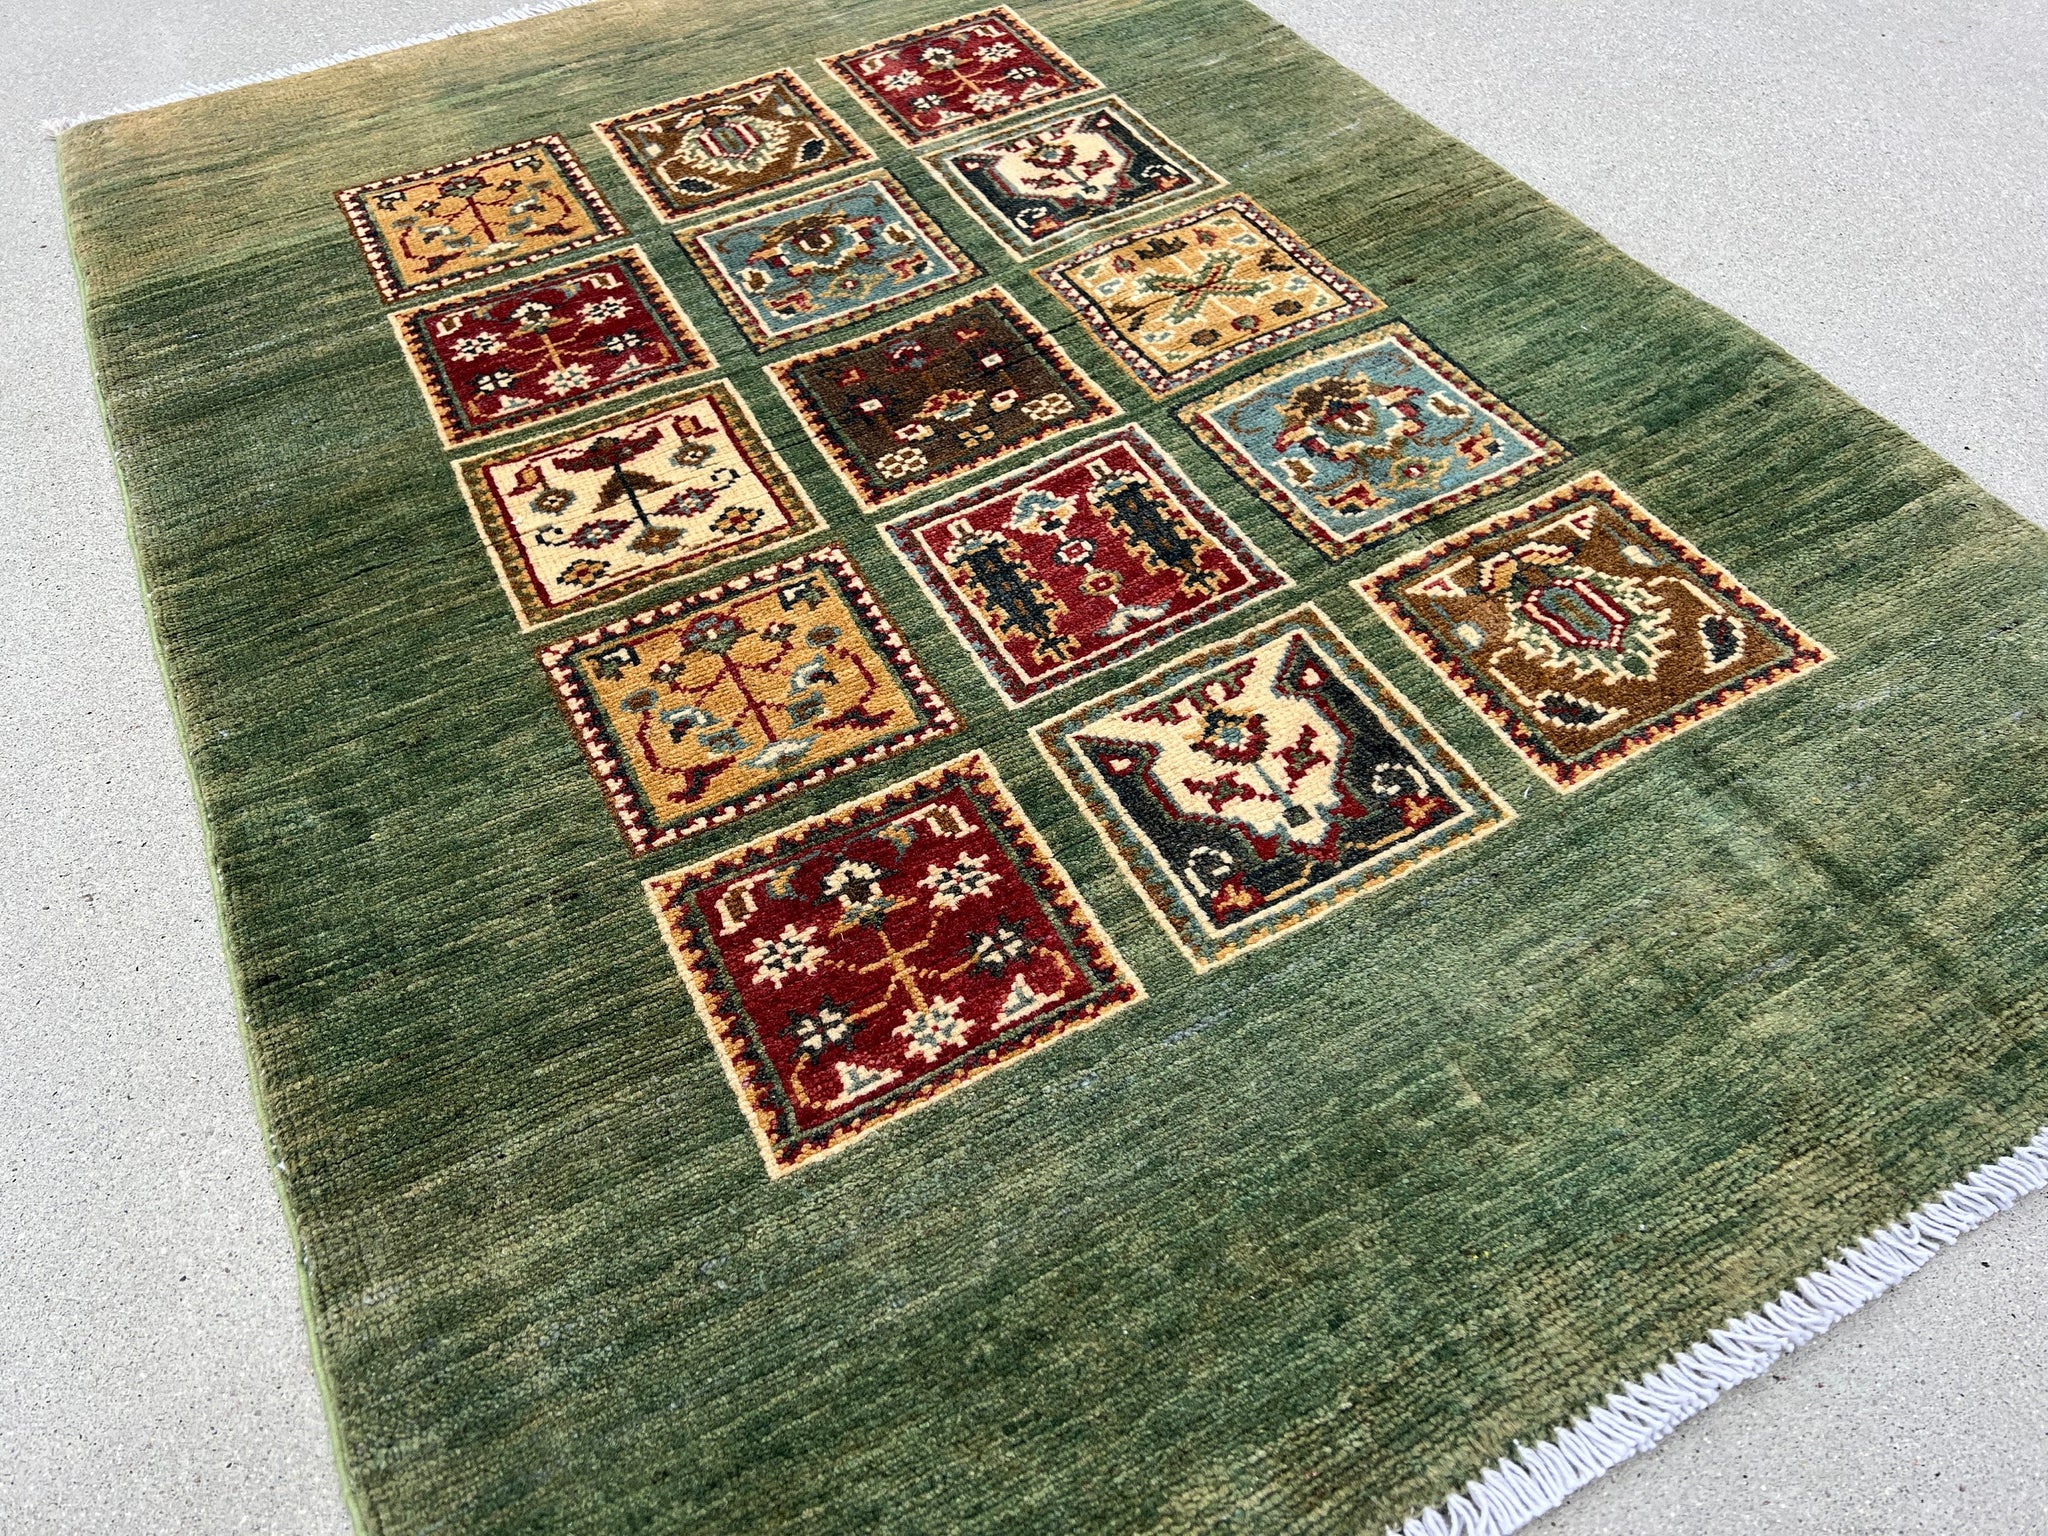 3x4 (100x180) Handmade Afghan Rug | Moss Green Maroon Red Beige Golden Brown Turquoise Denim Blue | Wool Hand Knotted Oushak Bohemian Floral